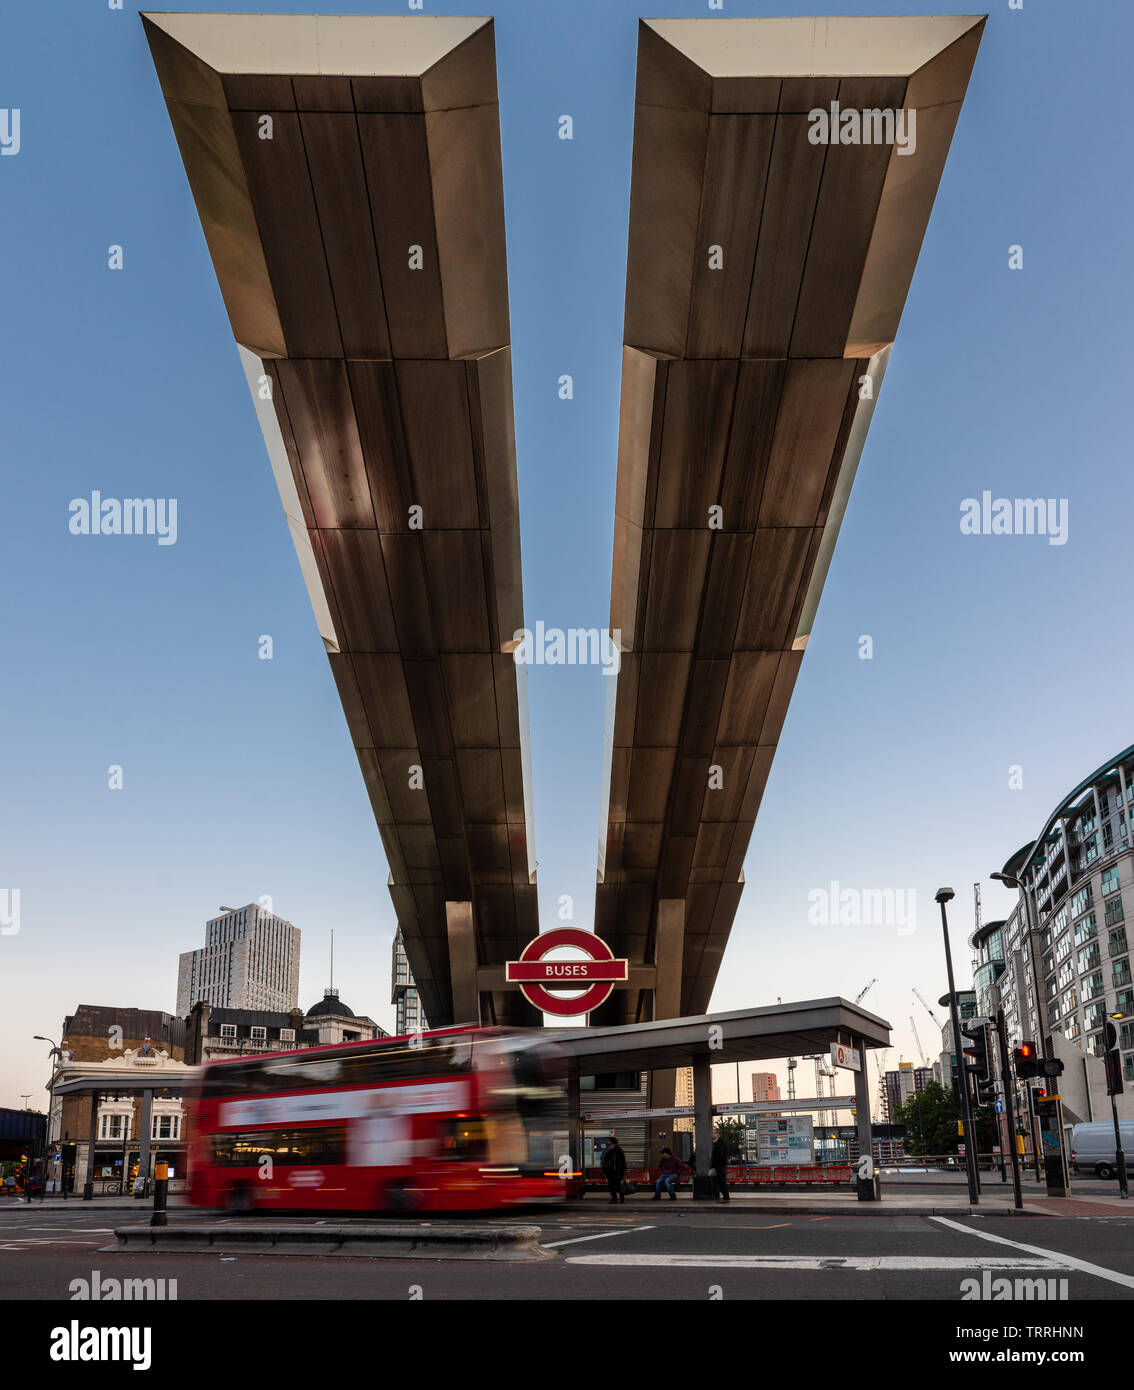 London, England, UK - May 28, 2019: Buses pass under the distinctive cantilevered roof of Vauxhall Bus Station in South London at dusk. Stock Photo